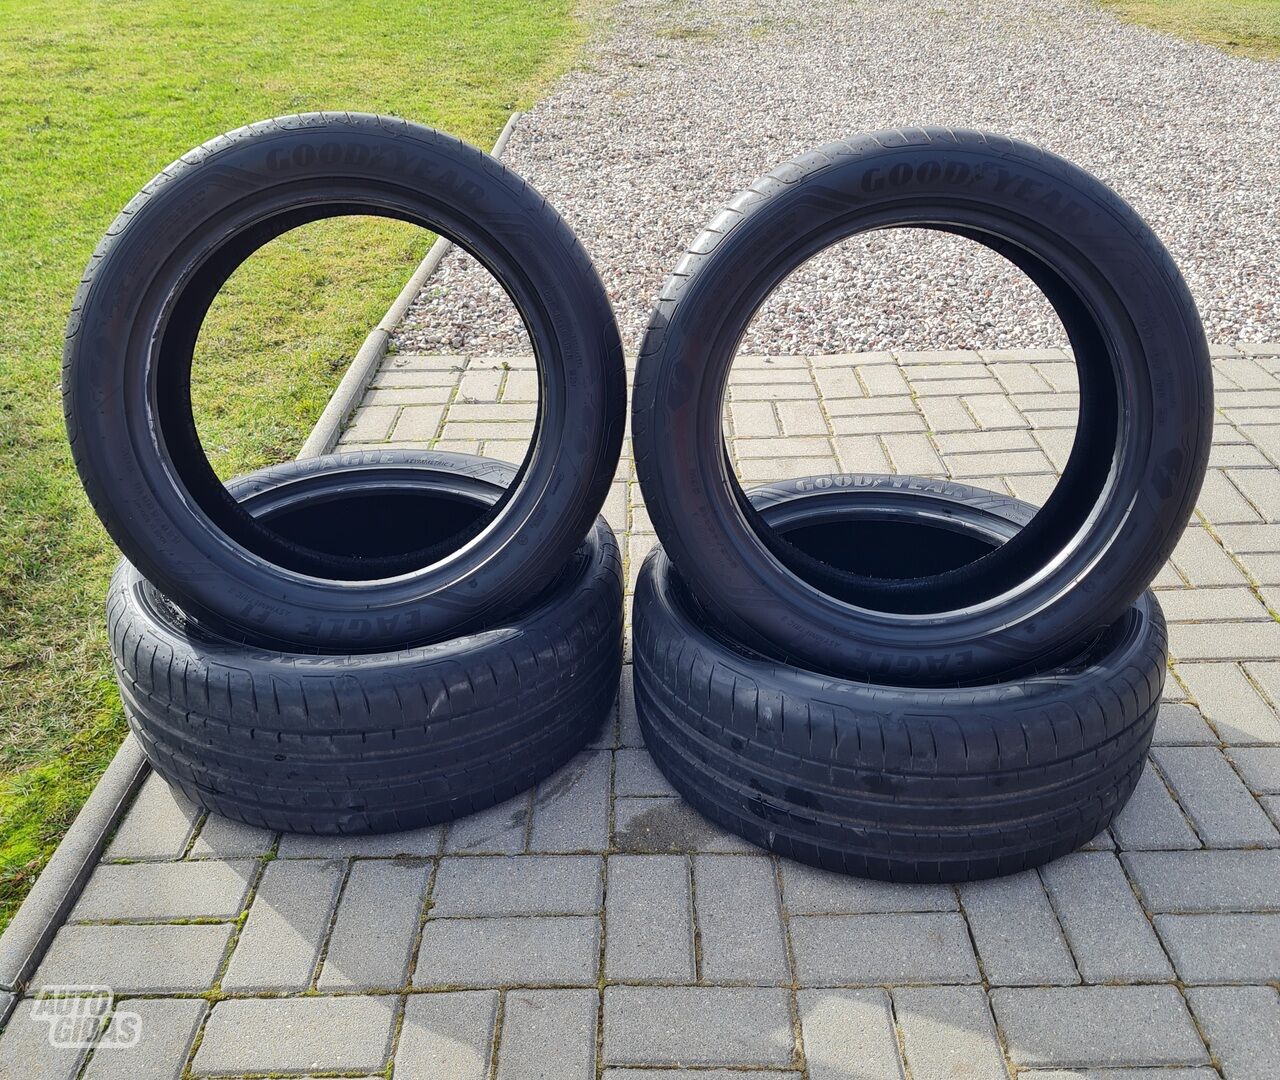 Goodyear Eagle F1 Assymetric R18 summer tyres passanger car